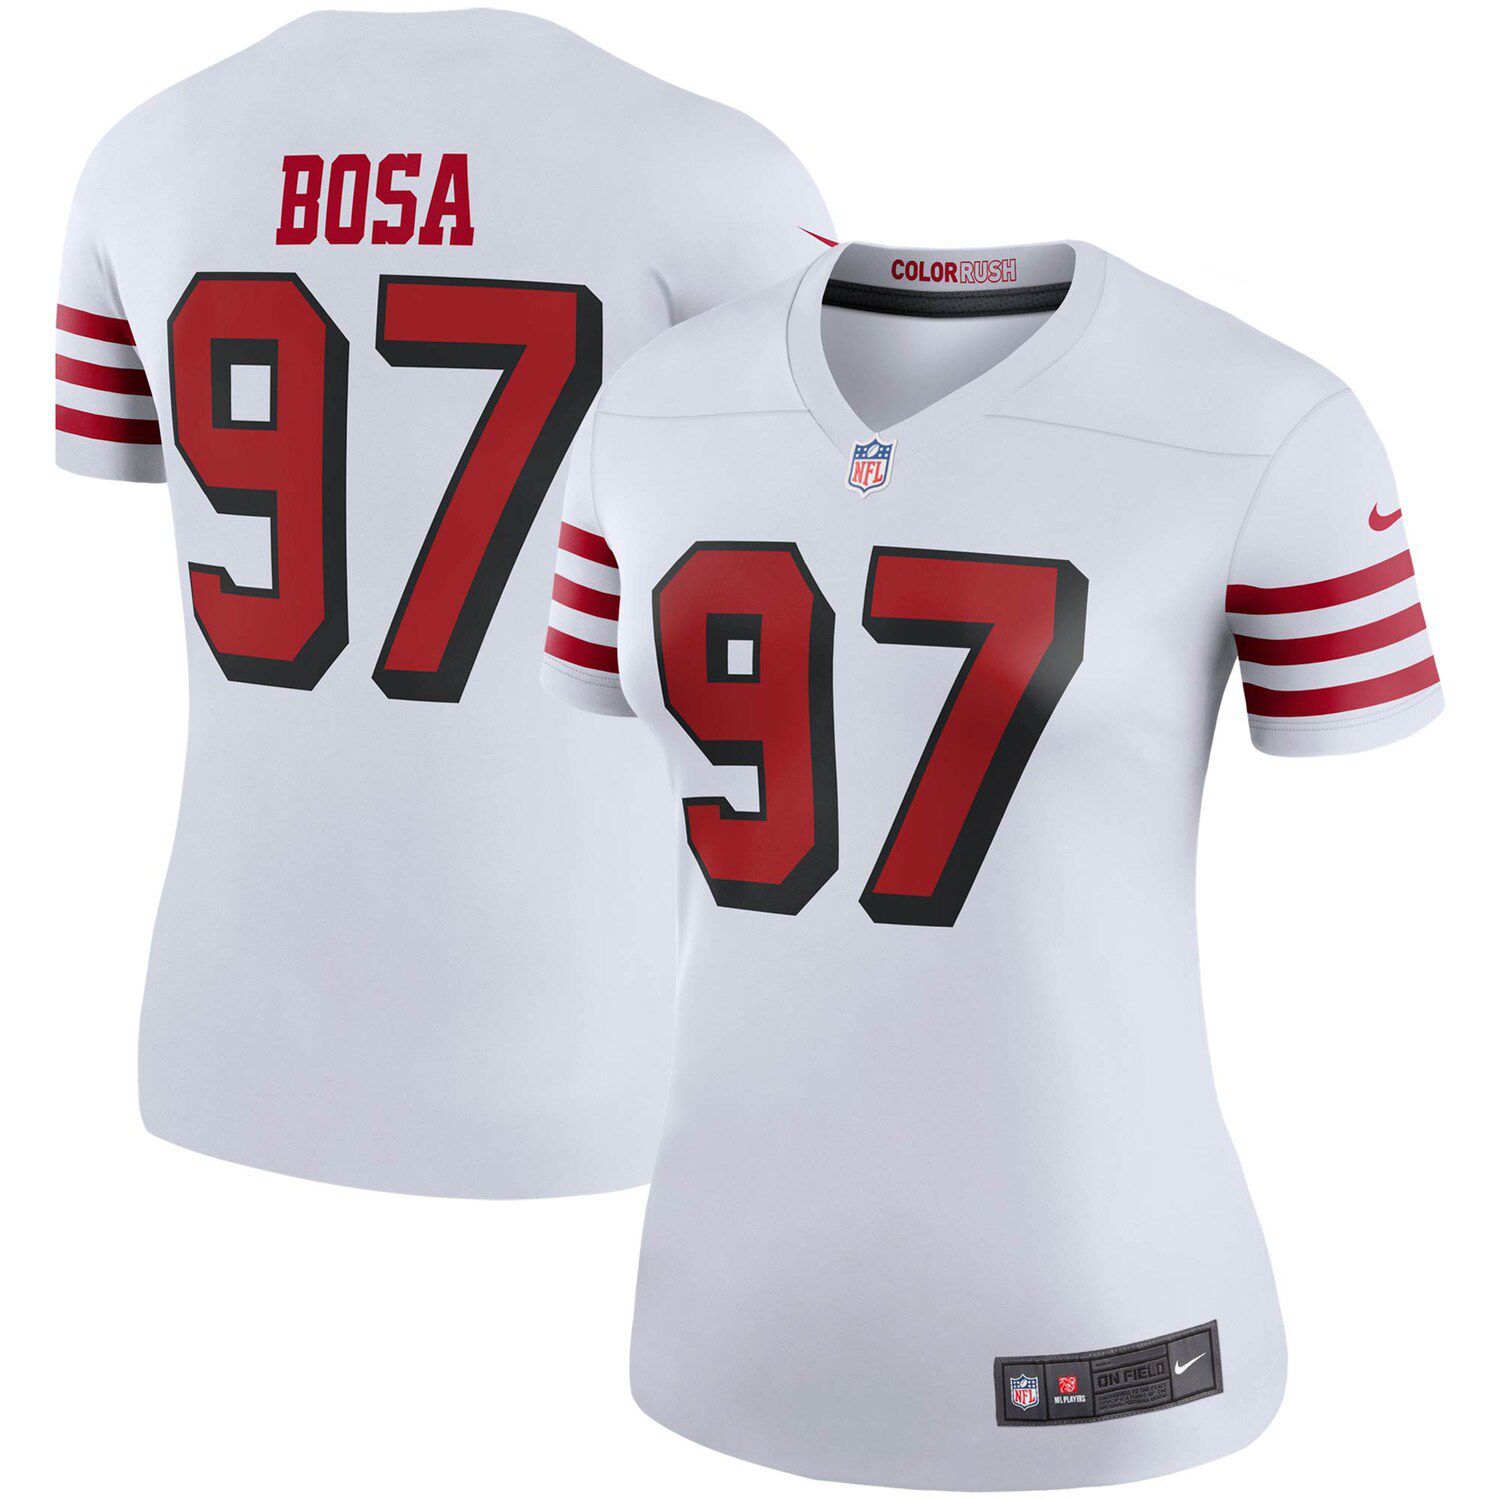 49ers military jersey